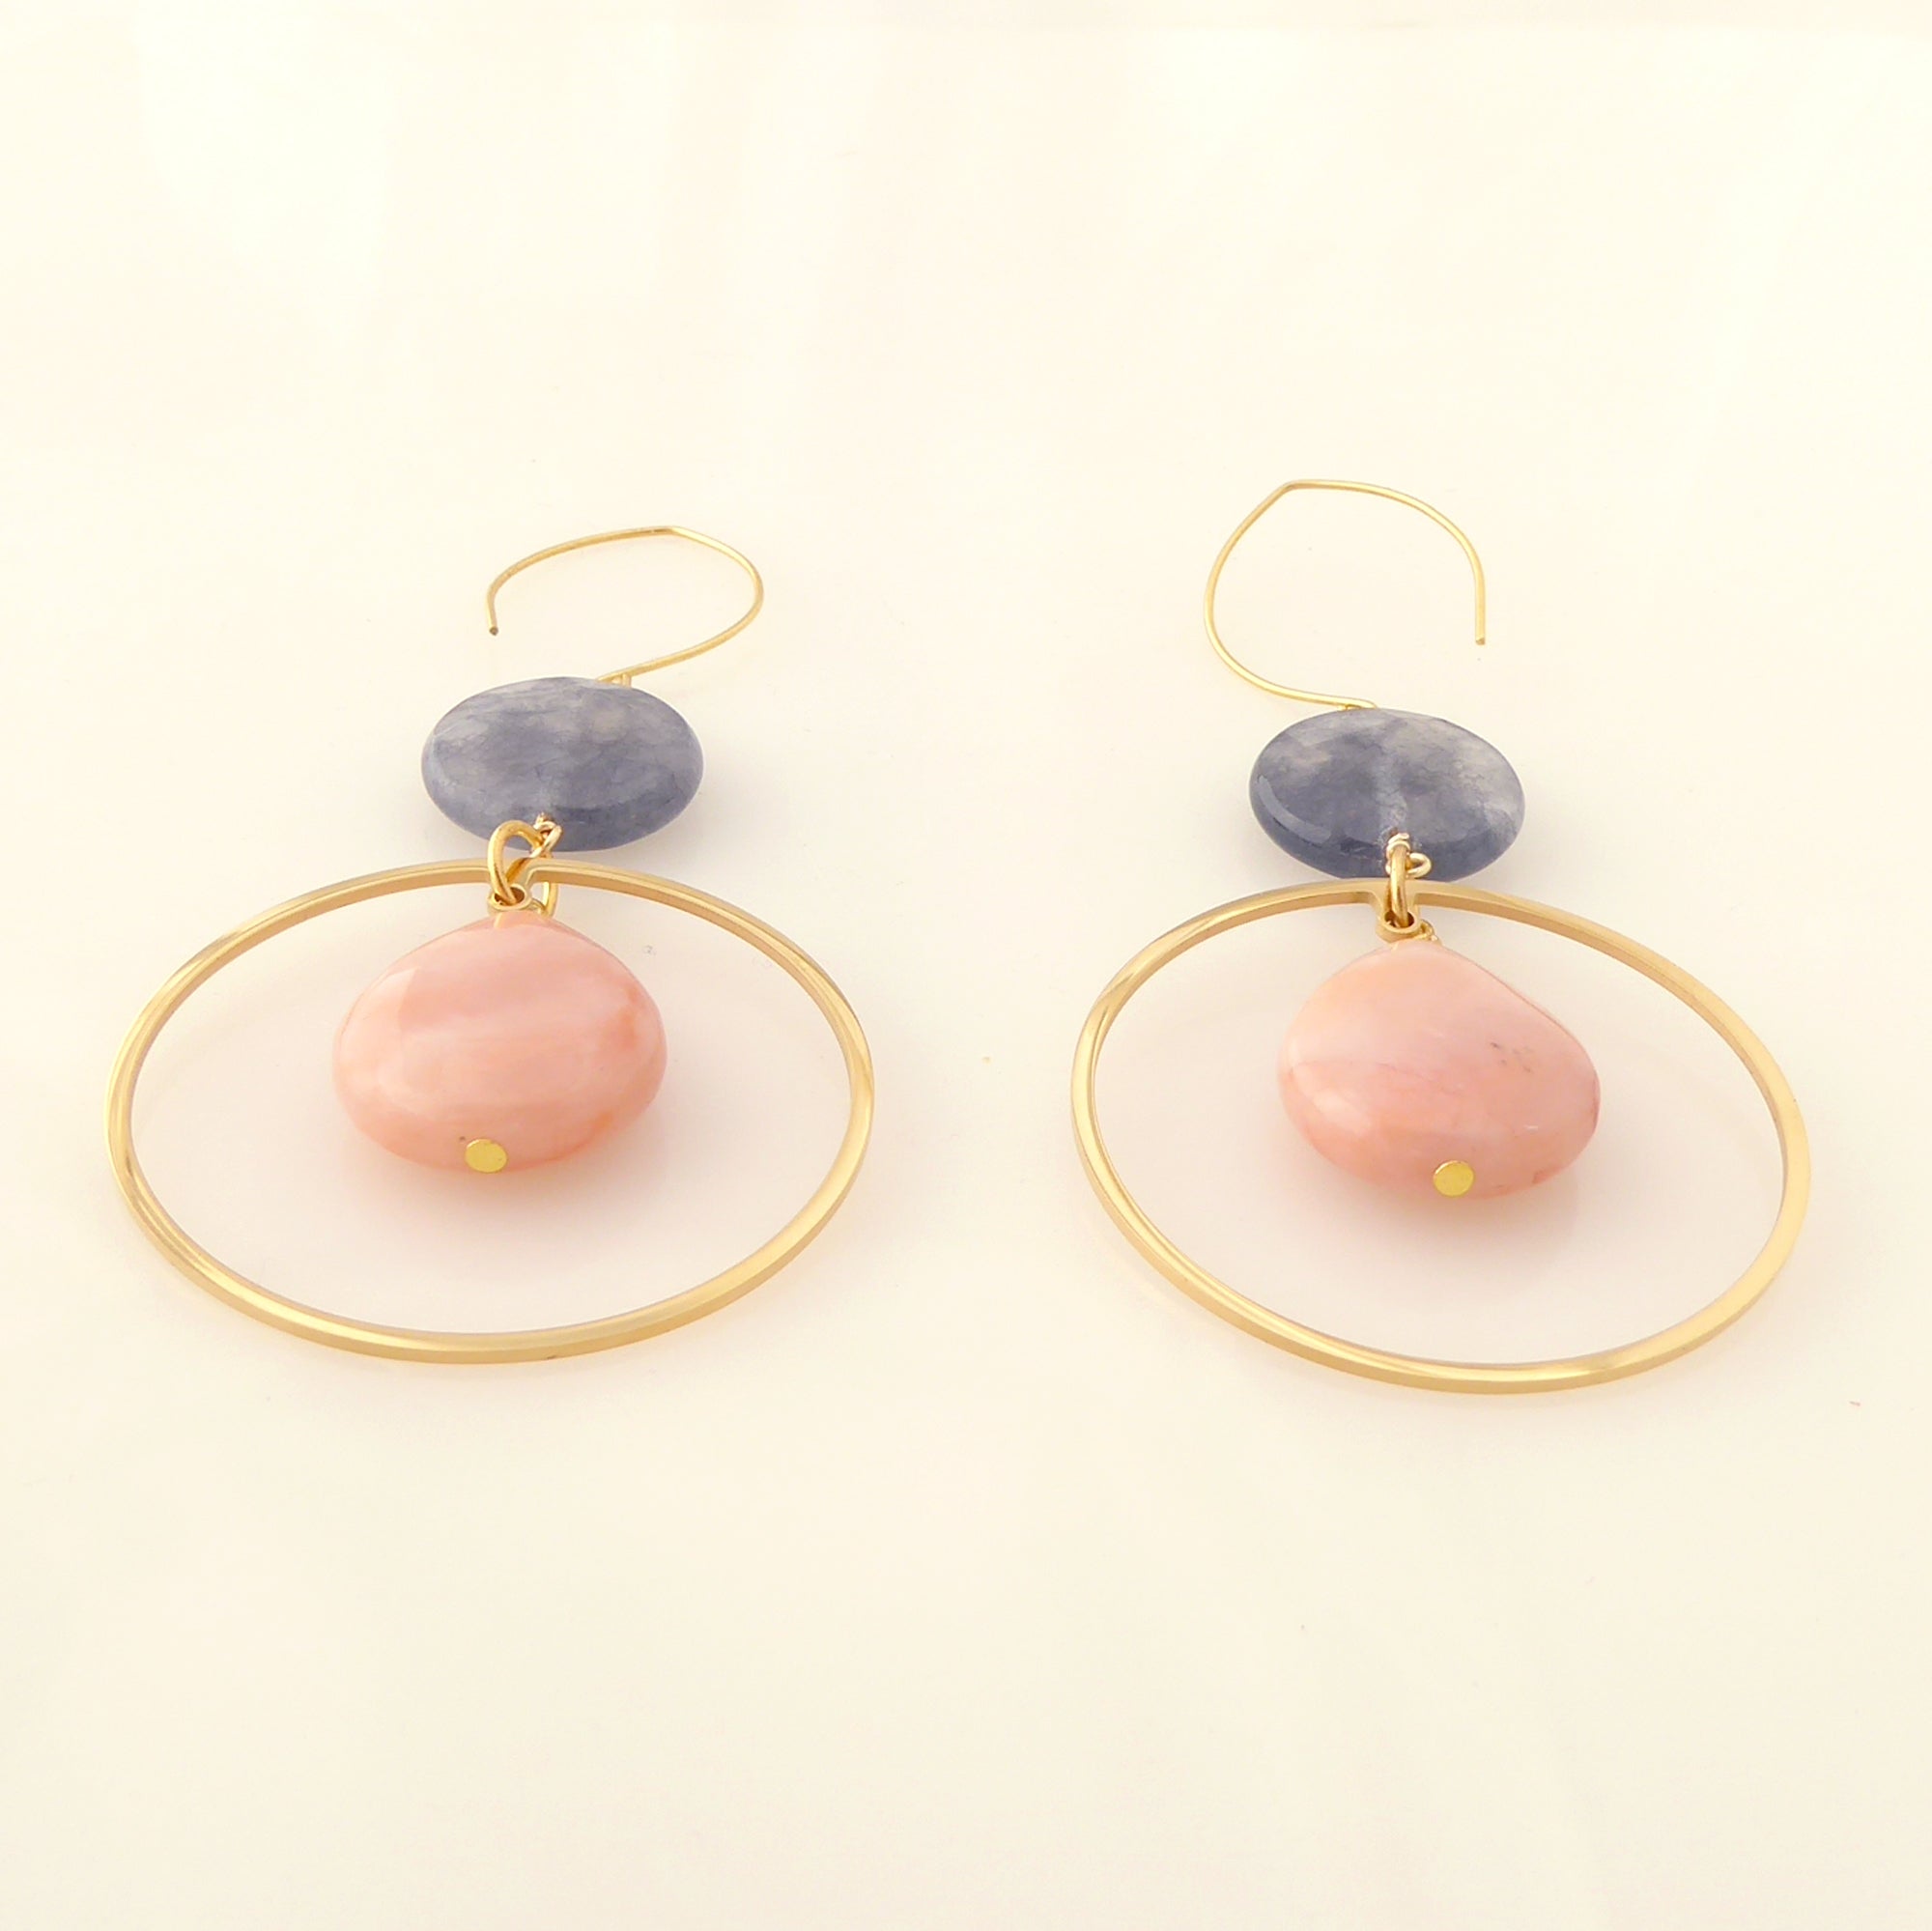 Peach aventurine and storm quartz earrings by Jenny Dayco 3